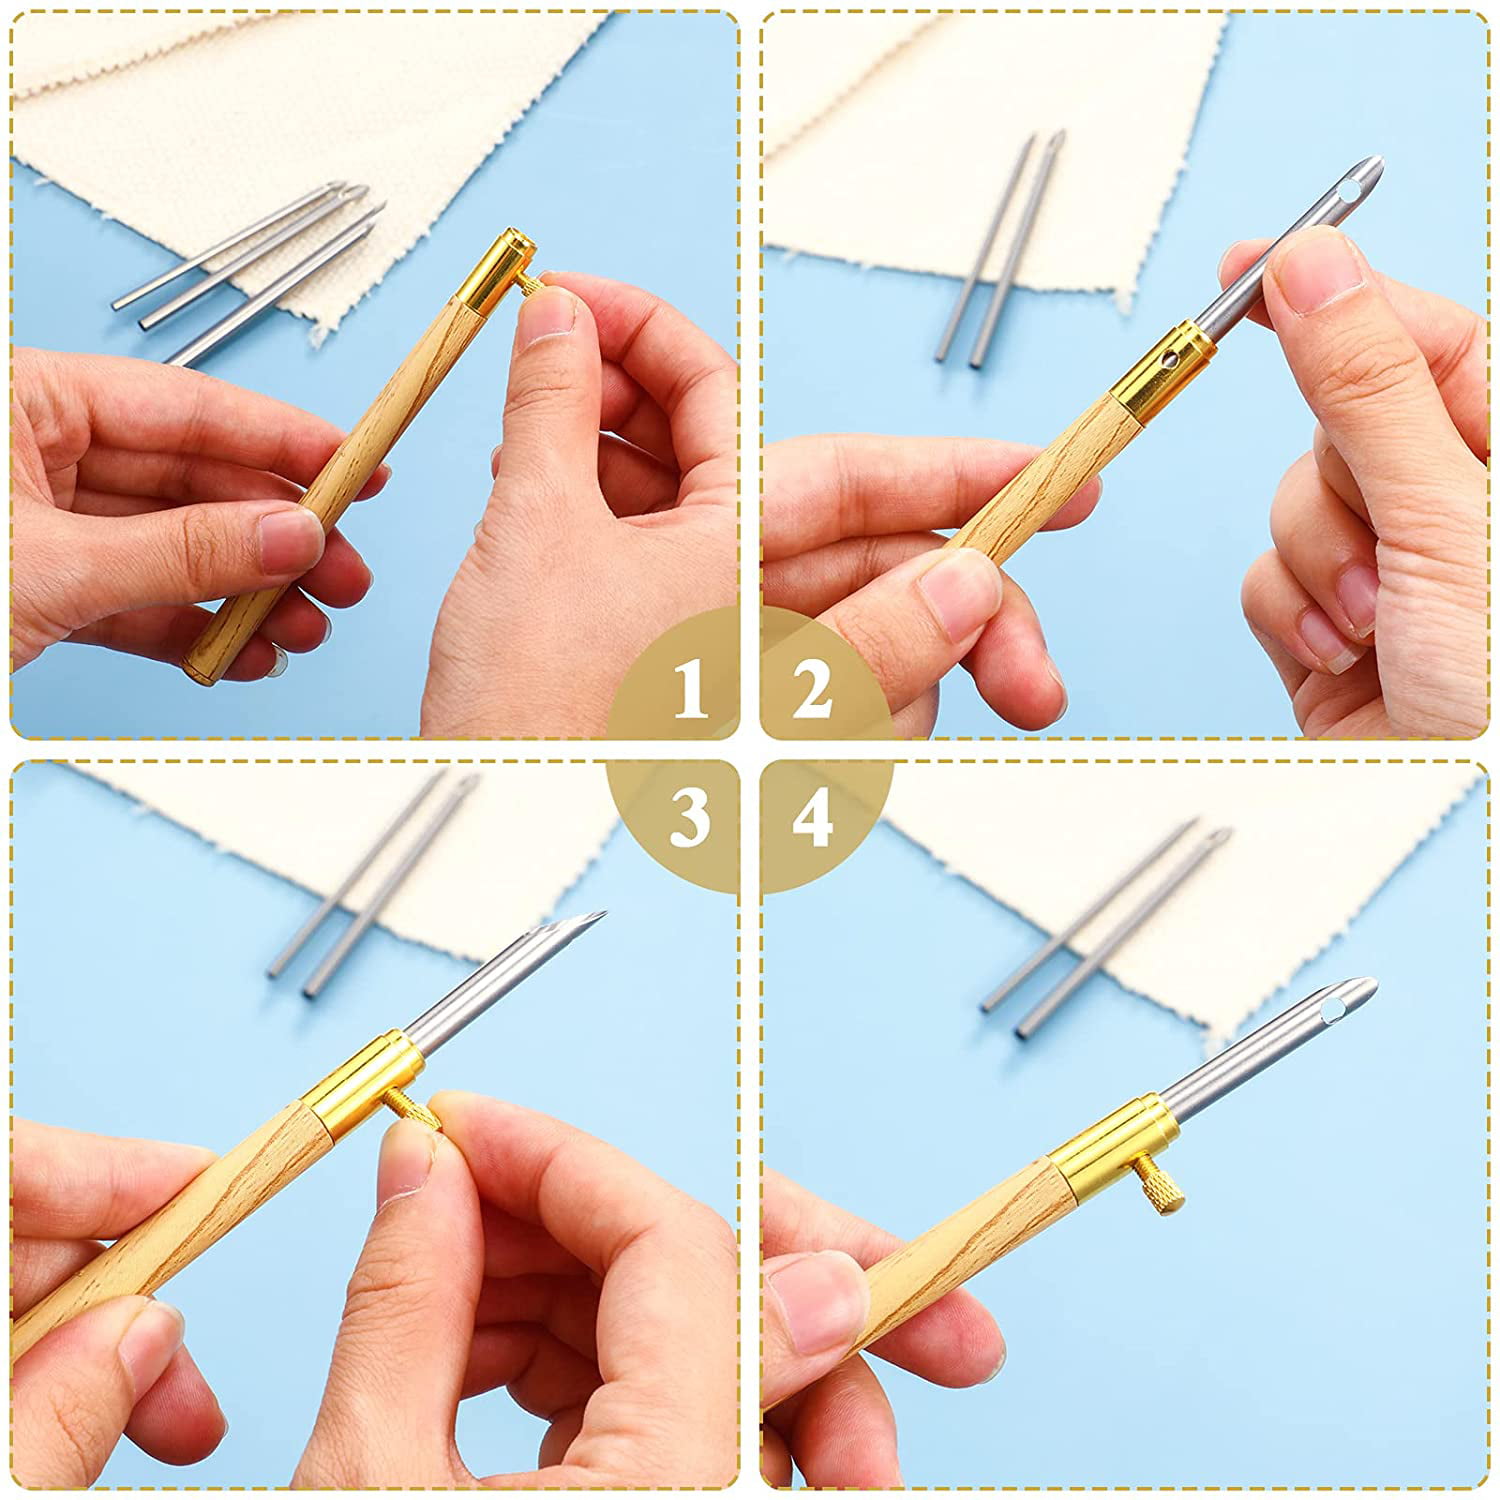 BetterJonny Wooden Embroidery Pen with 4 Long Needle Threader and 4 Small Needle Threader 4pcs Wooden Handle Punch Needle 